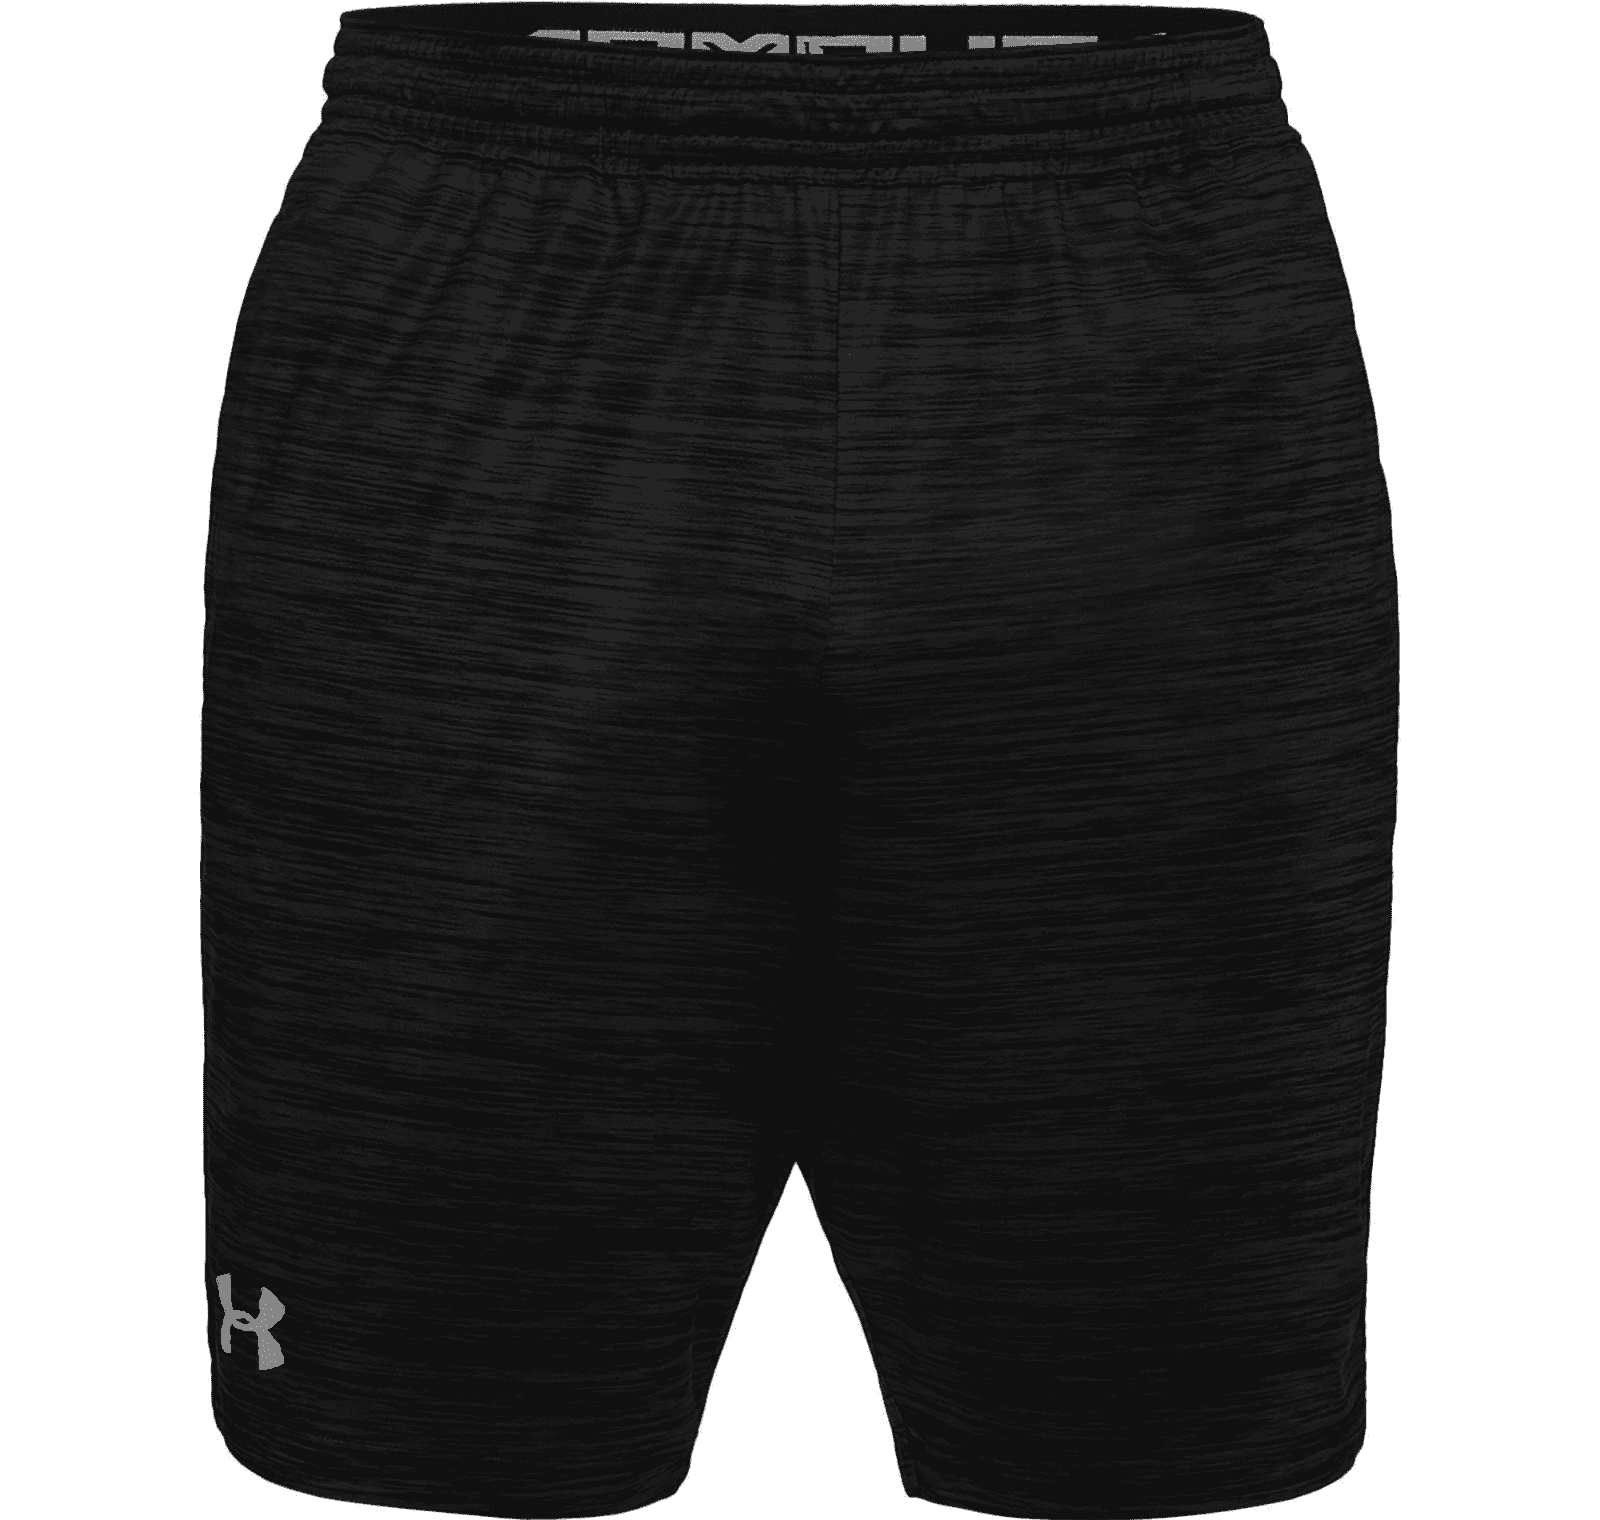 New With Tags Mens Under Armour Gym UA Muscle Tech Mesh Athletic Logo Shorts 